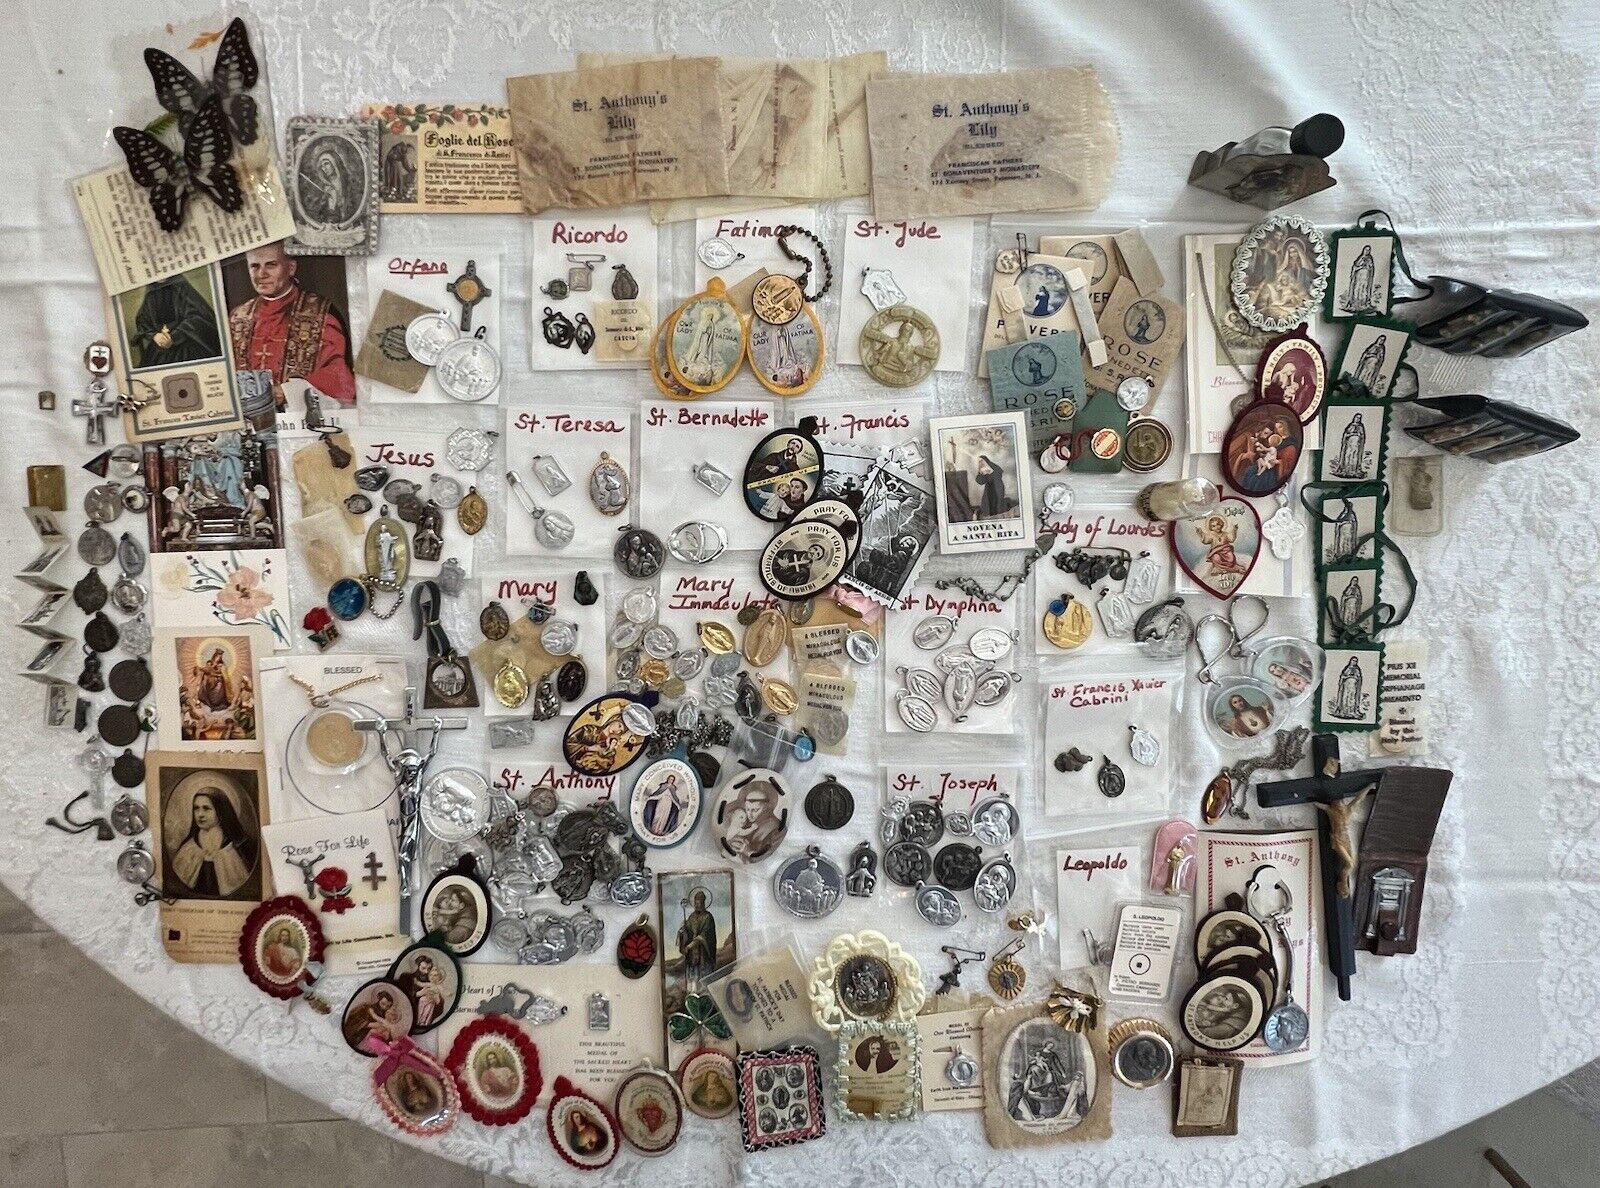 Huge VINTAGE lot of 300++ CATHOLIC RELIGIOUS Medals, Relics, Scapulas, ++